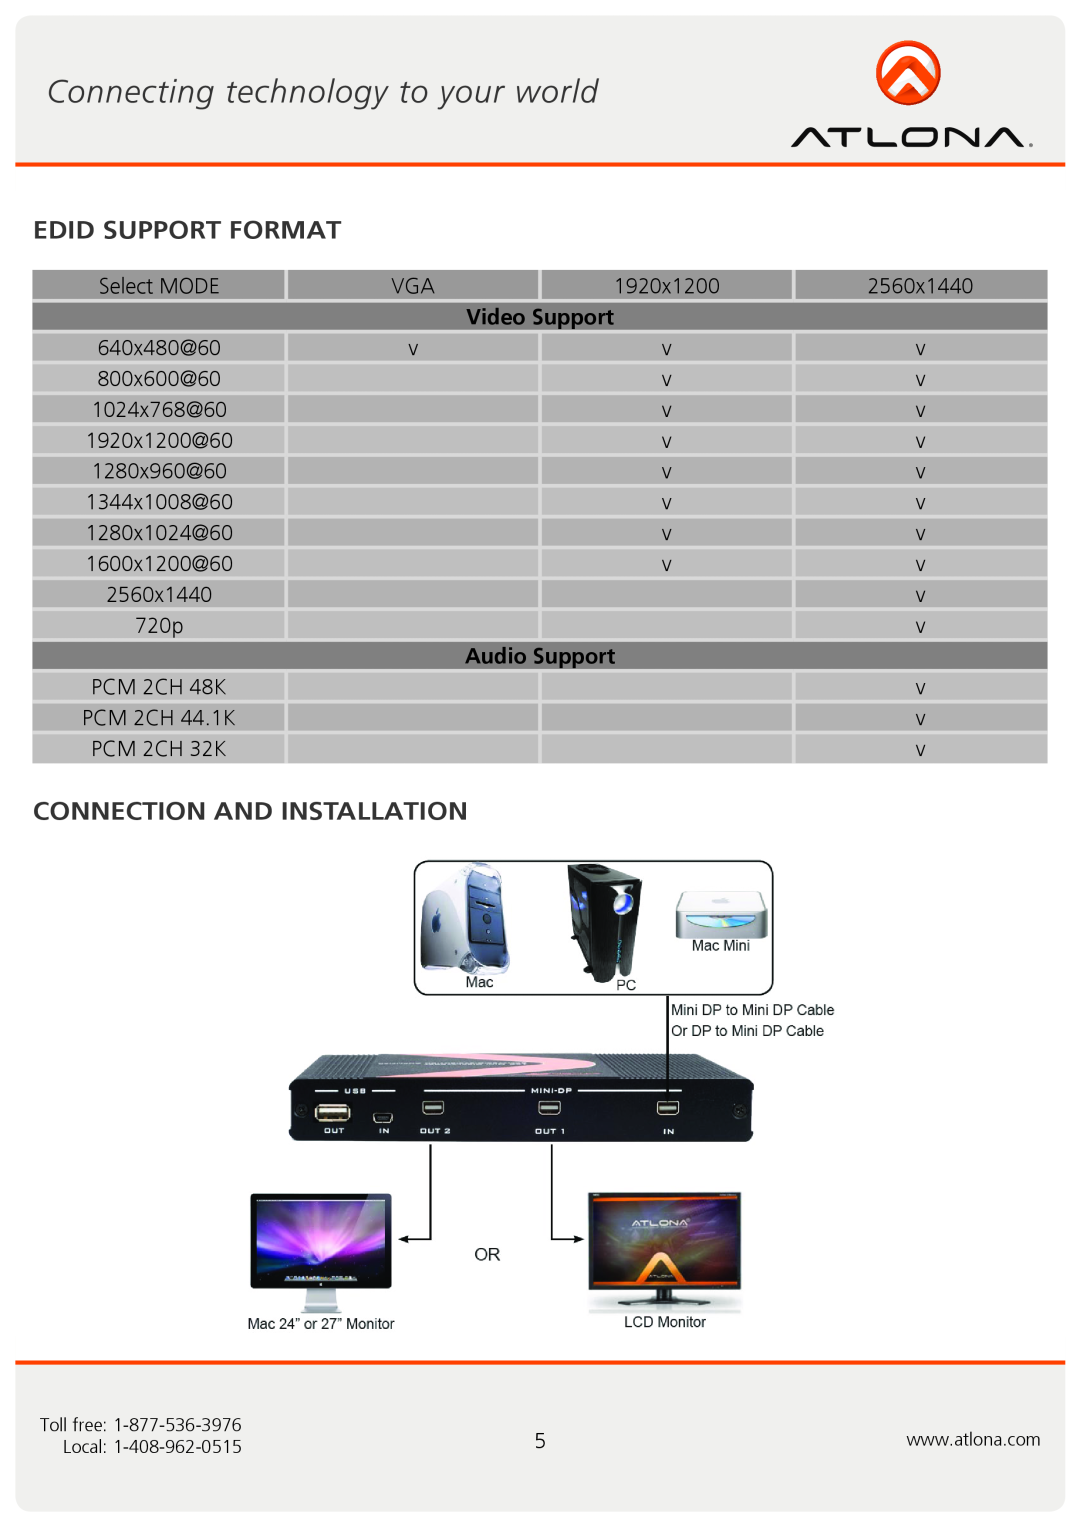 Atlona AT-MDP12 user manual Edid Support Format, Connection And Installation, Video Support, Audio Support 